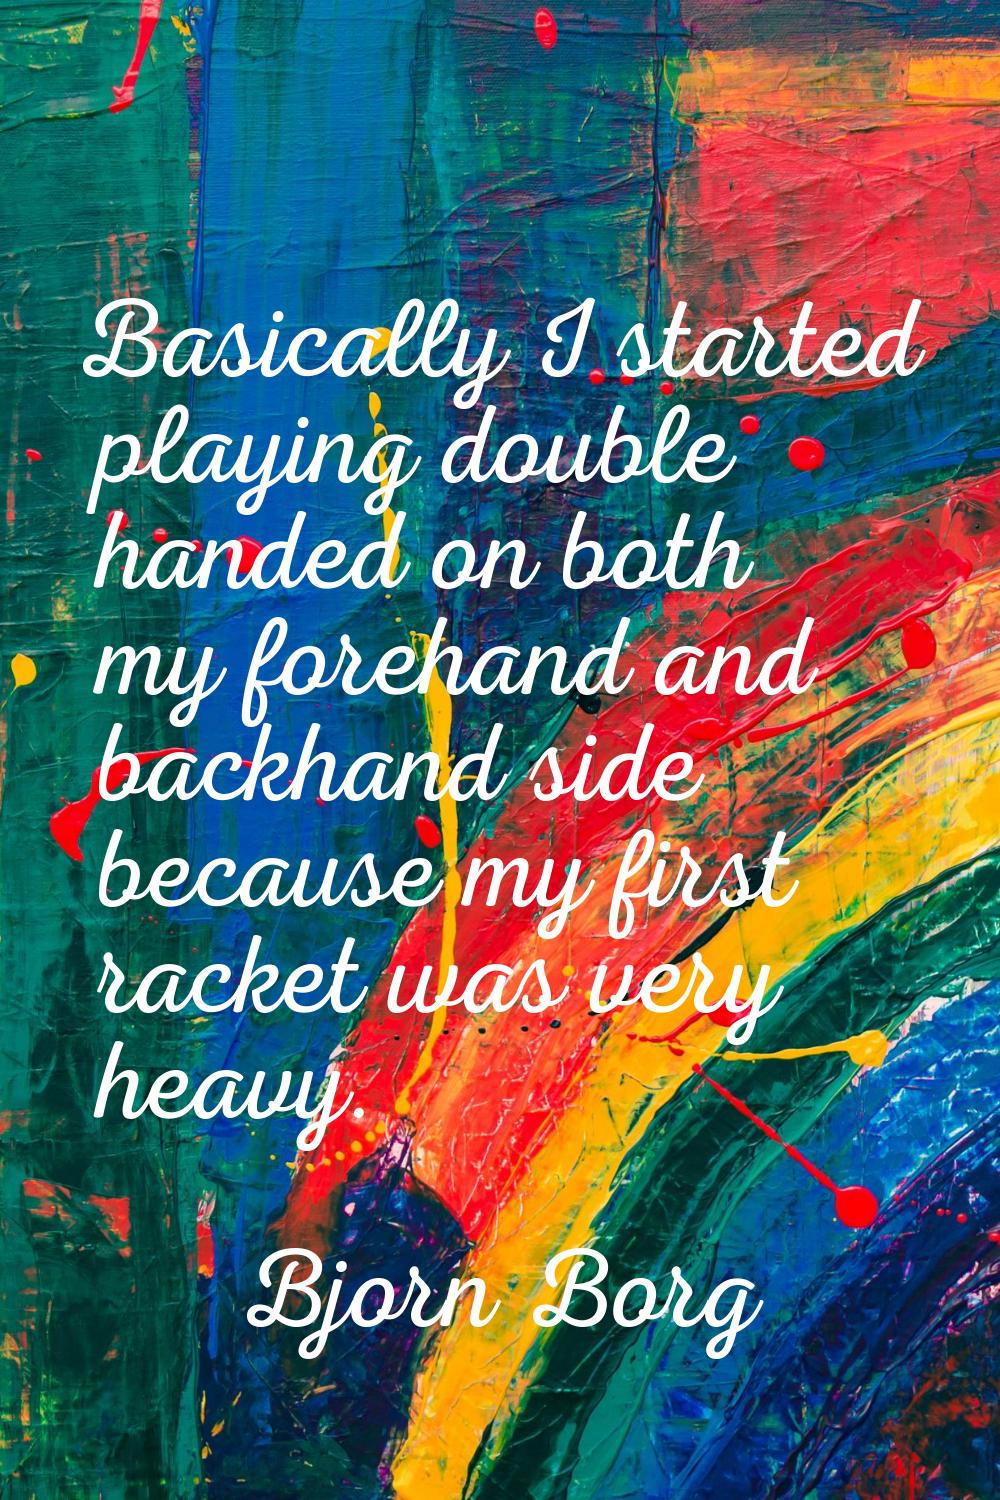 Basically I started playing double handed on both my forehand and backhand side because my first ra